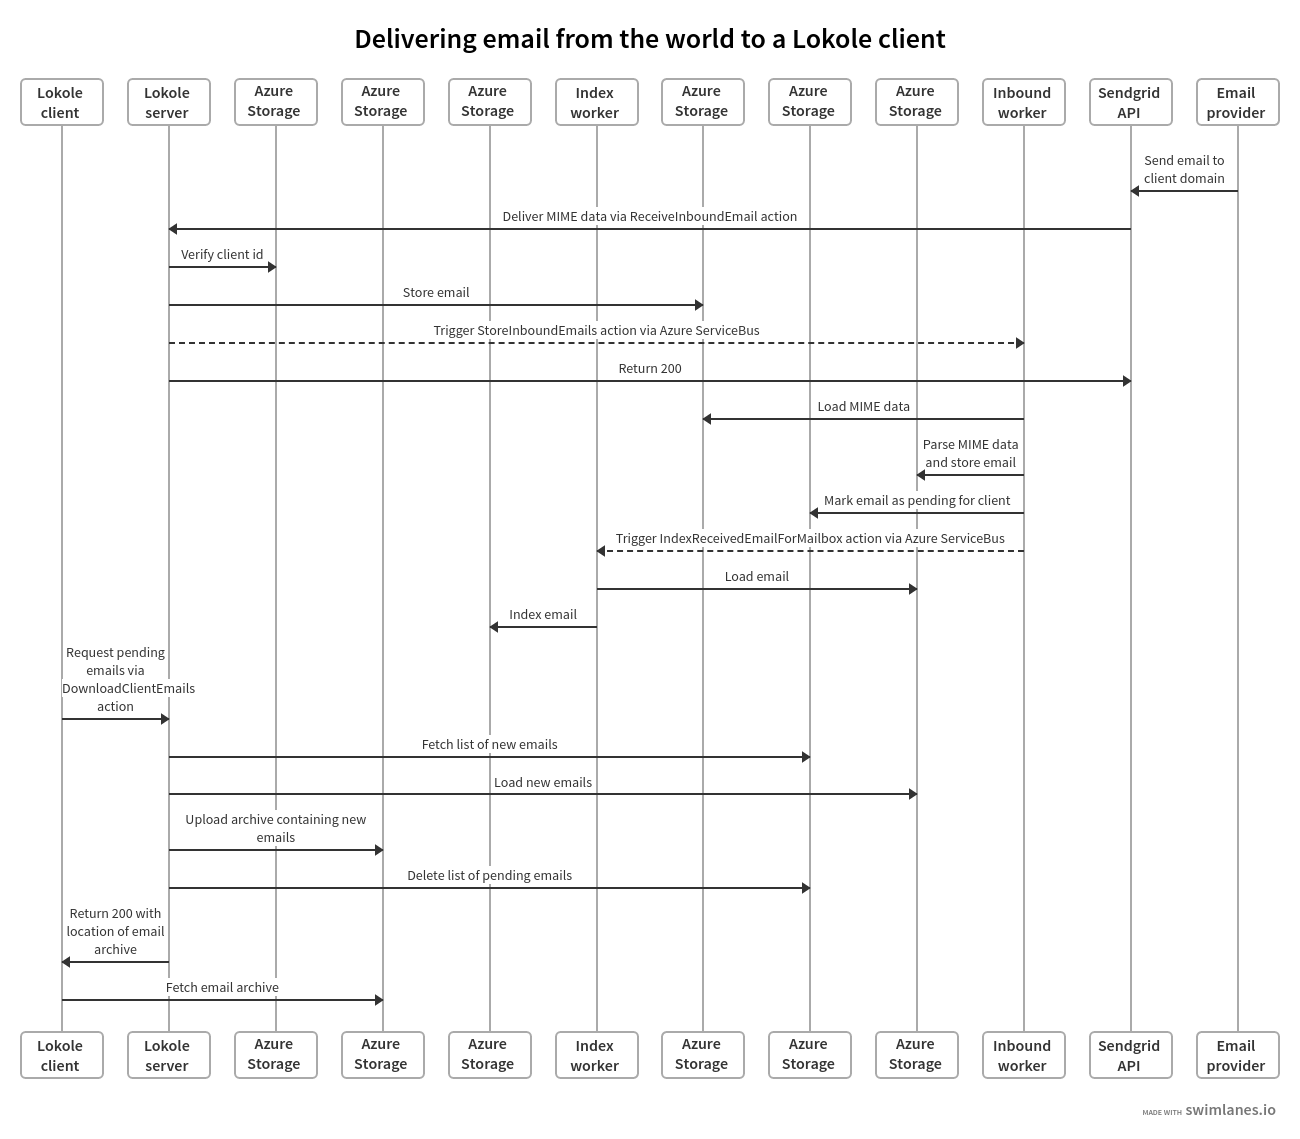 Overview of the Lokole client email download flow